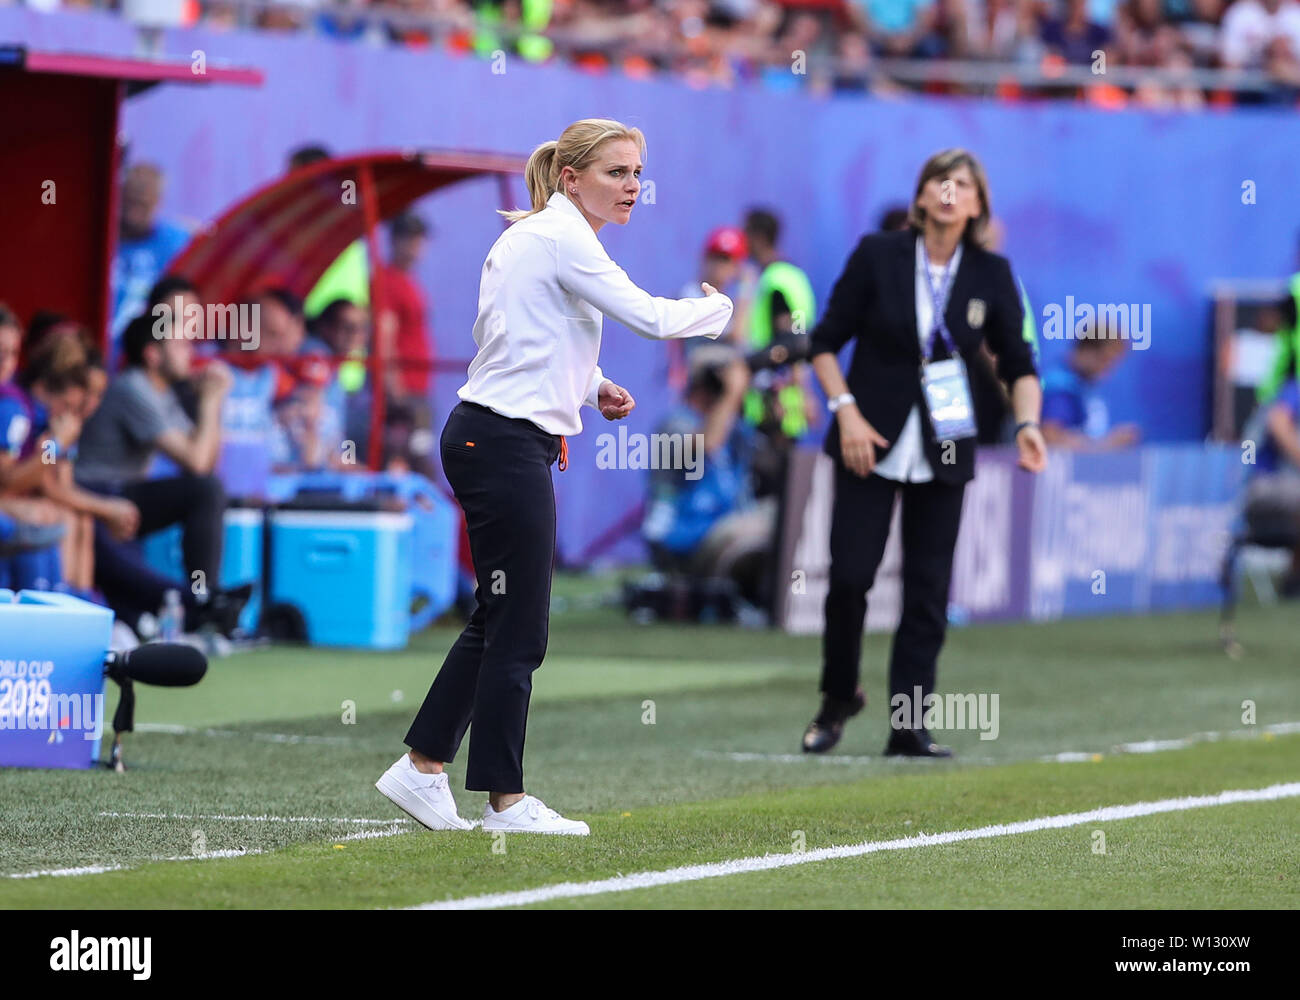 Valenciennes, France. 29th June, 2019. Sarina Wiegman (L), head coach of the Netherlands, gestures during the quarterfinal between Italy and the Netherlands at the 2019 FIFA Women's World Cup in Valenciennes, France, June 29, 2019. The Netherlands won 2-0. Credit: Shan Yuqi/Xinhua/Alamy Live News Stock Photo